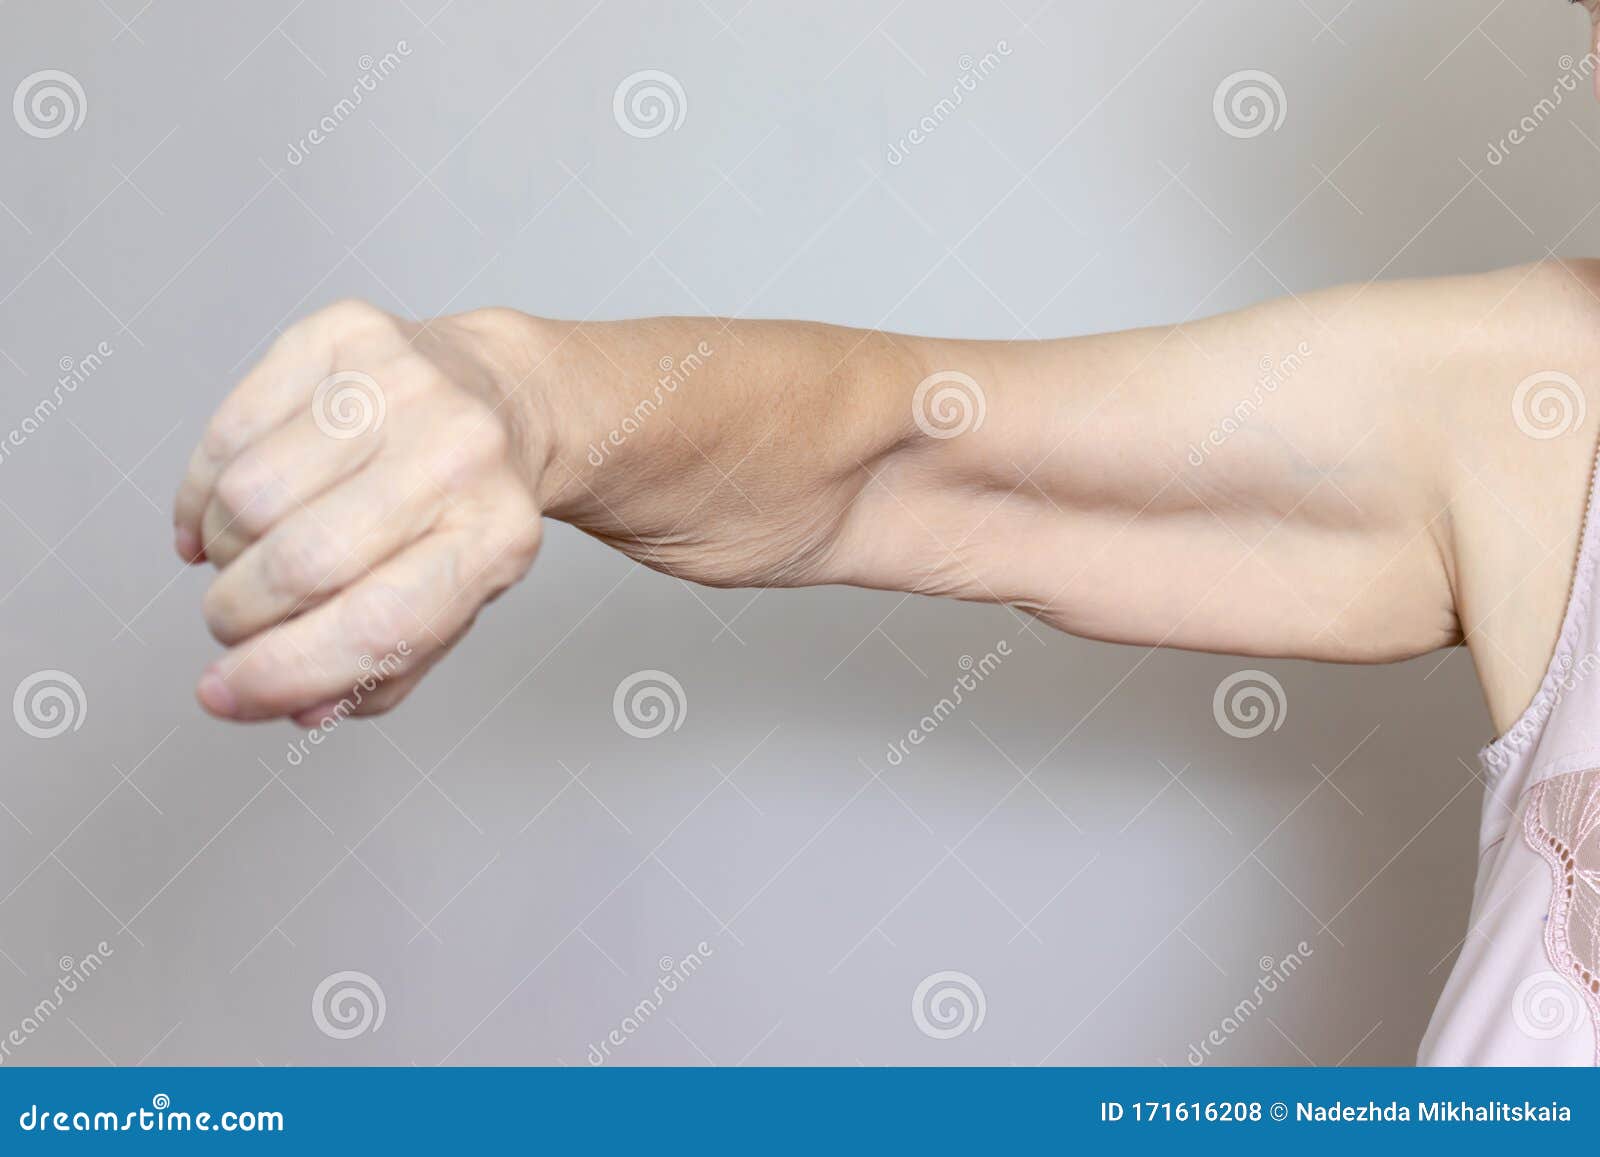 an excess loose skin on an arm of a senior elderly woman after extreme weight loss